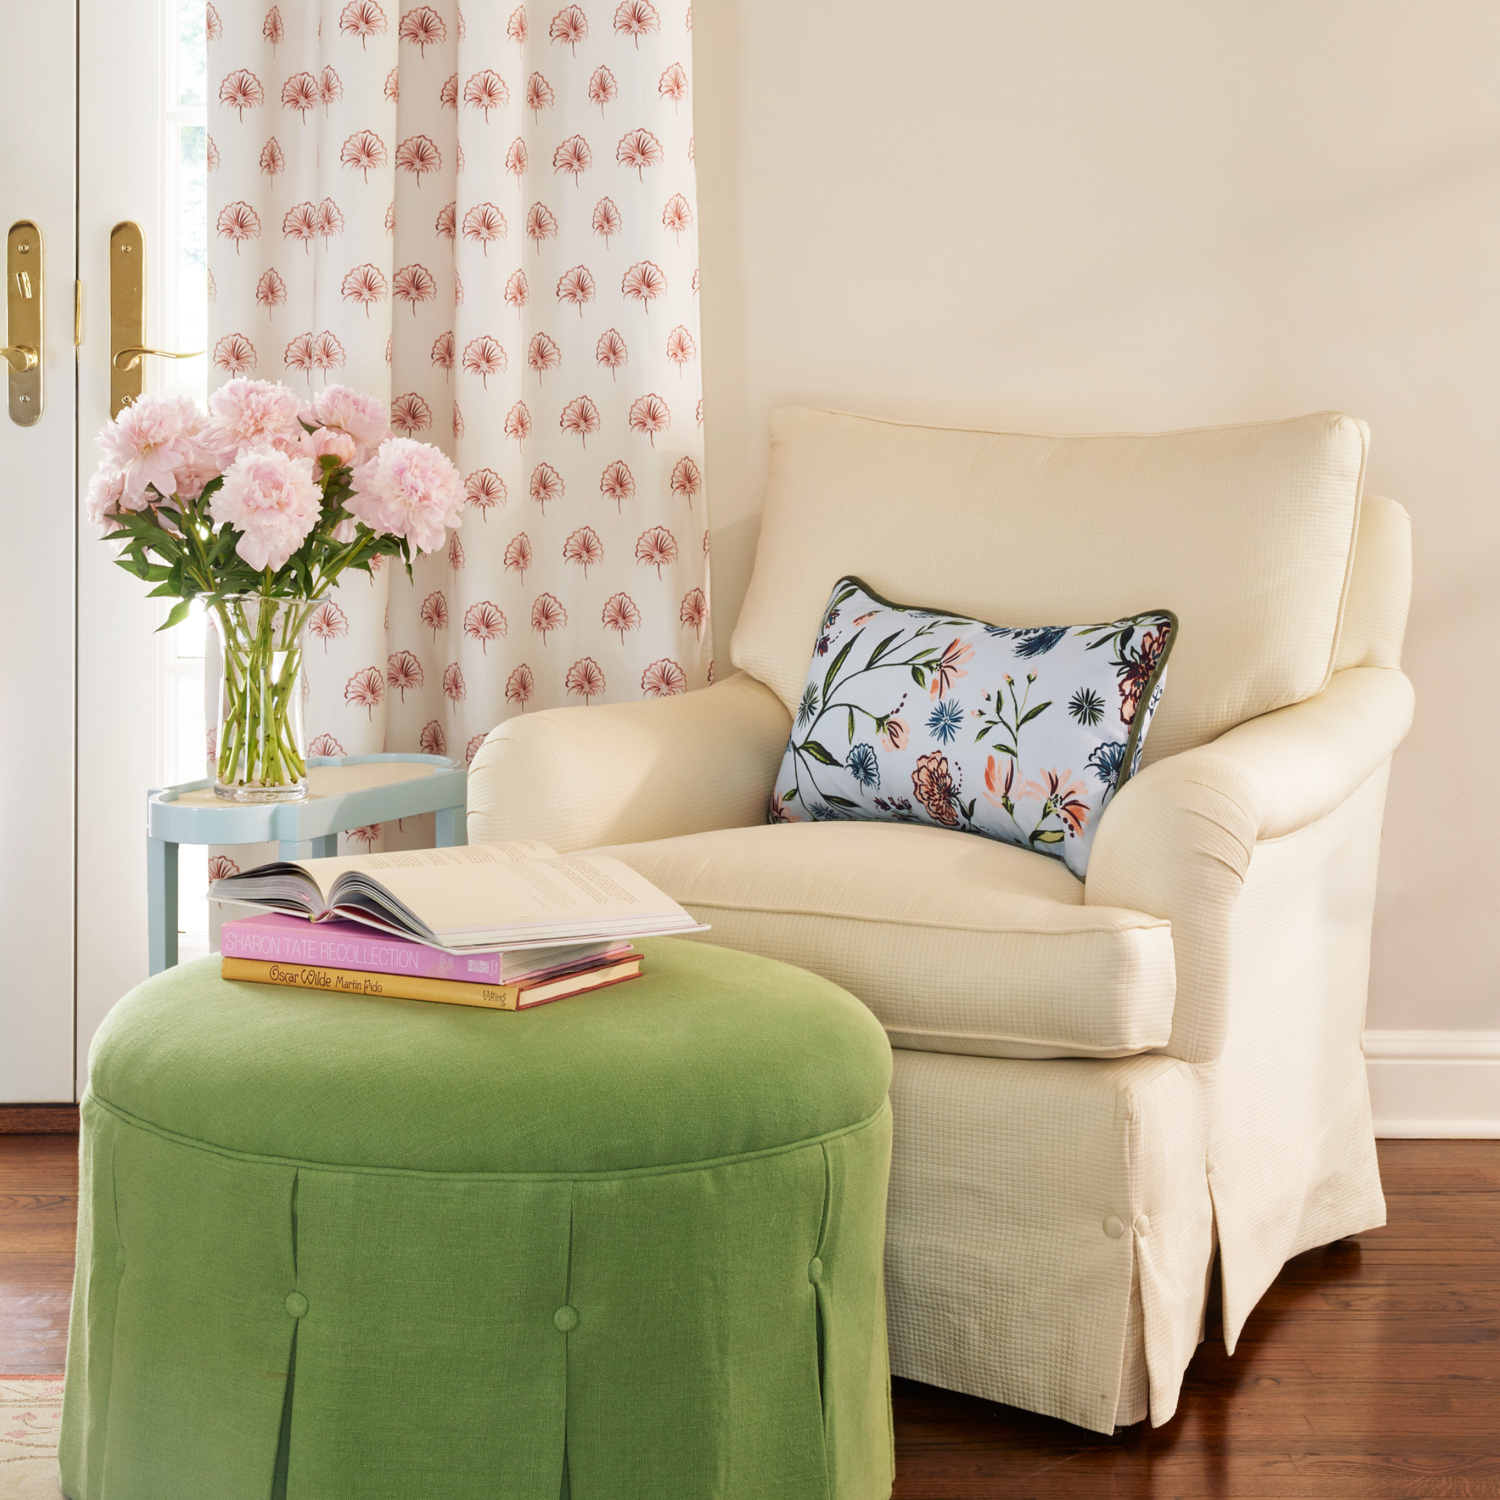 Living room styled with Blue Chinoiserie pillow on beige sofa chair with Rose Floral Curtain hanging next to it and pink flowers in transparent vase on top of small blue table in the back of green circular couch with books stacked on top